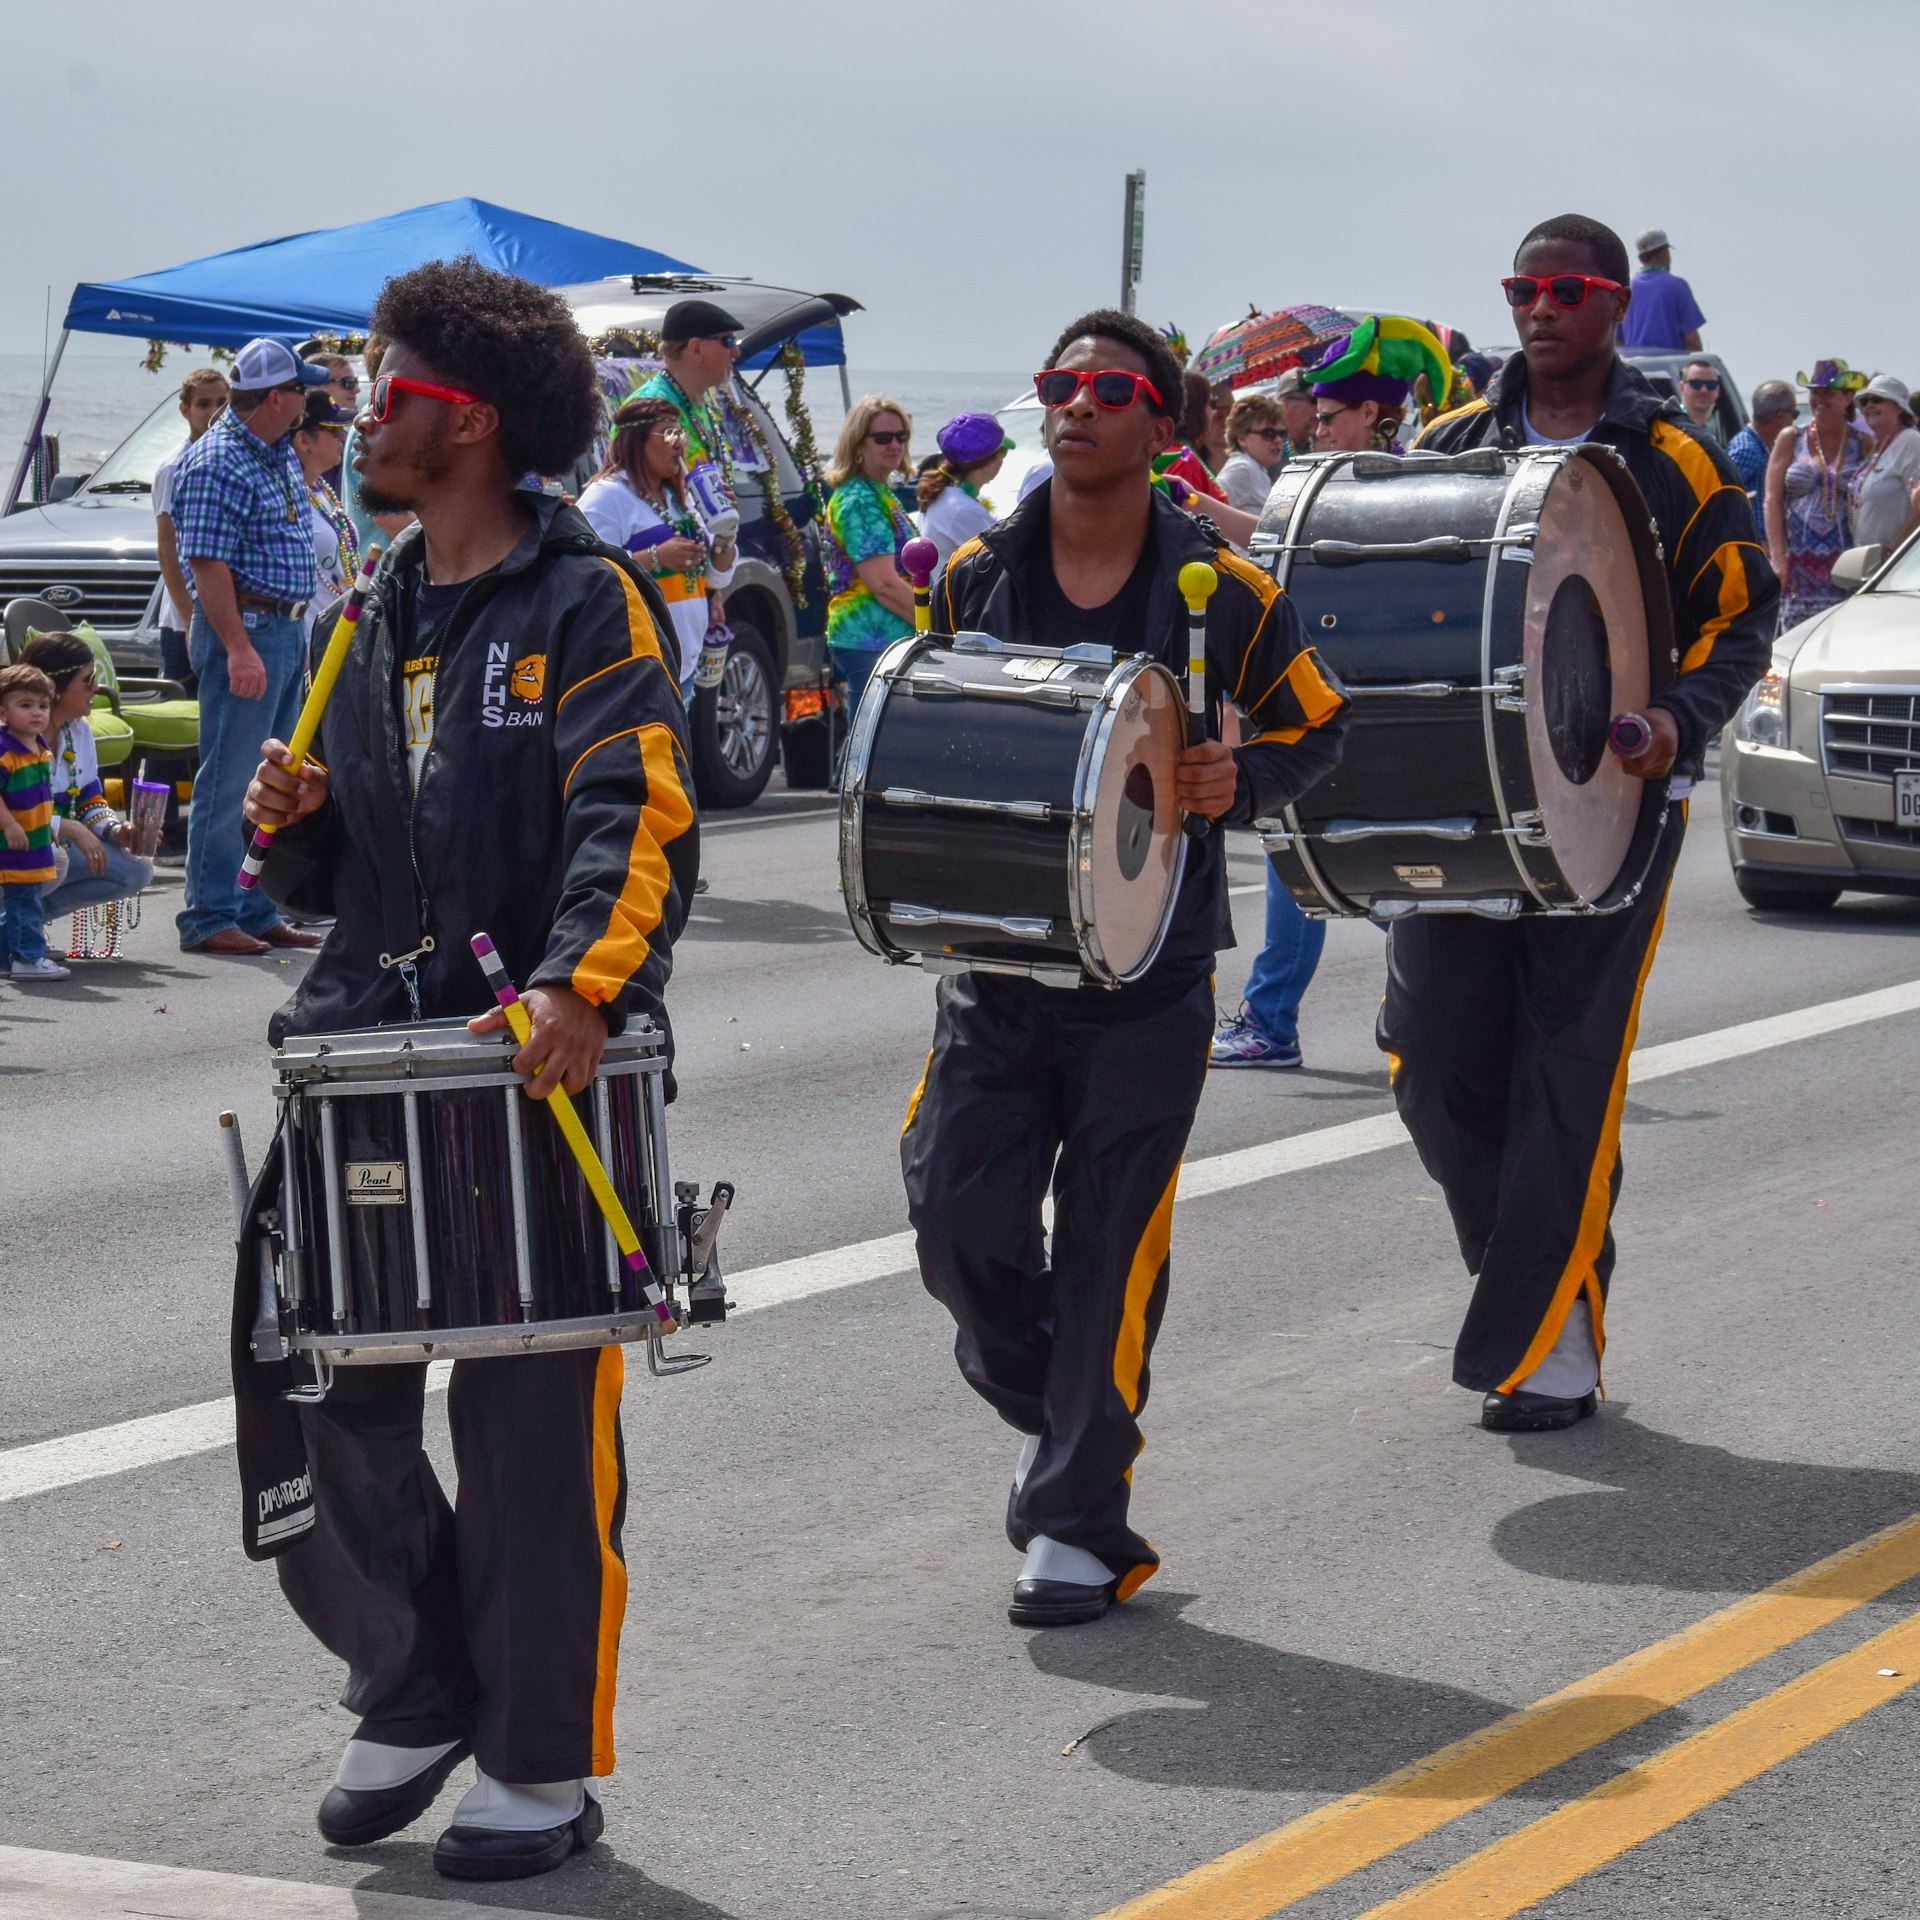 Three black men play drums as they walk along taking part in a parade down the street